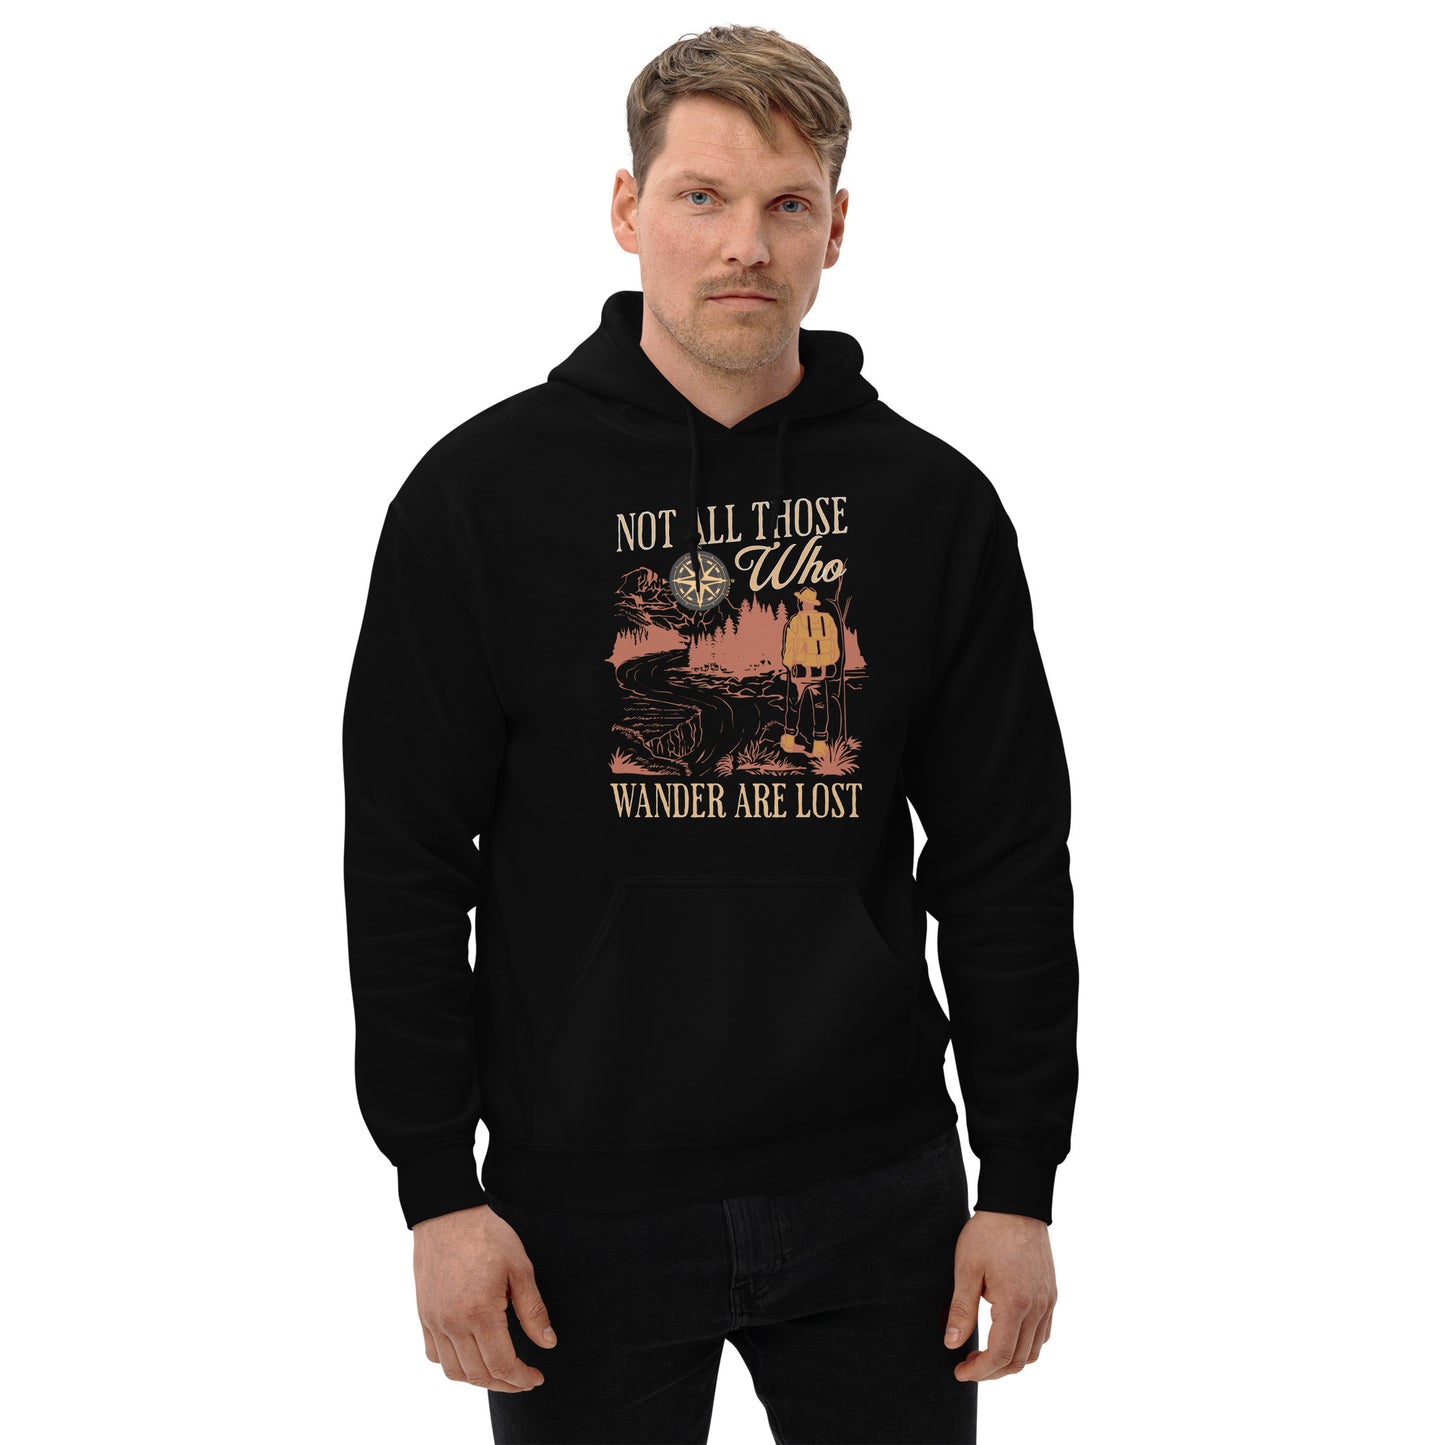 Not All Those Who Wander Are Lost Unisex Hoodie